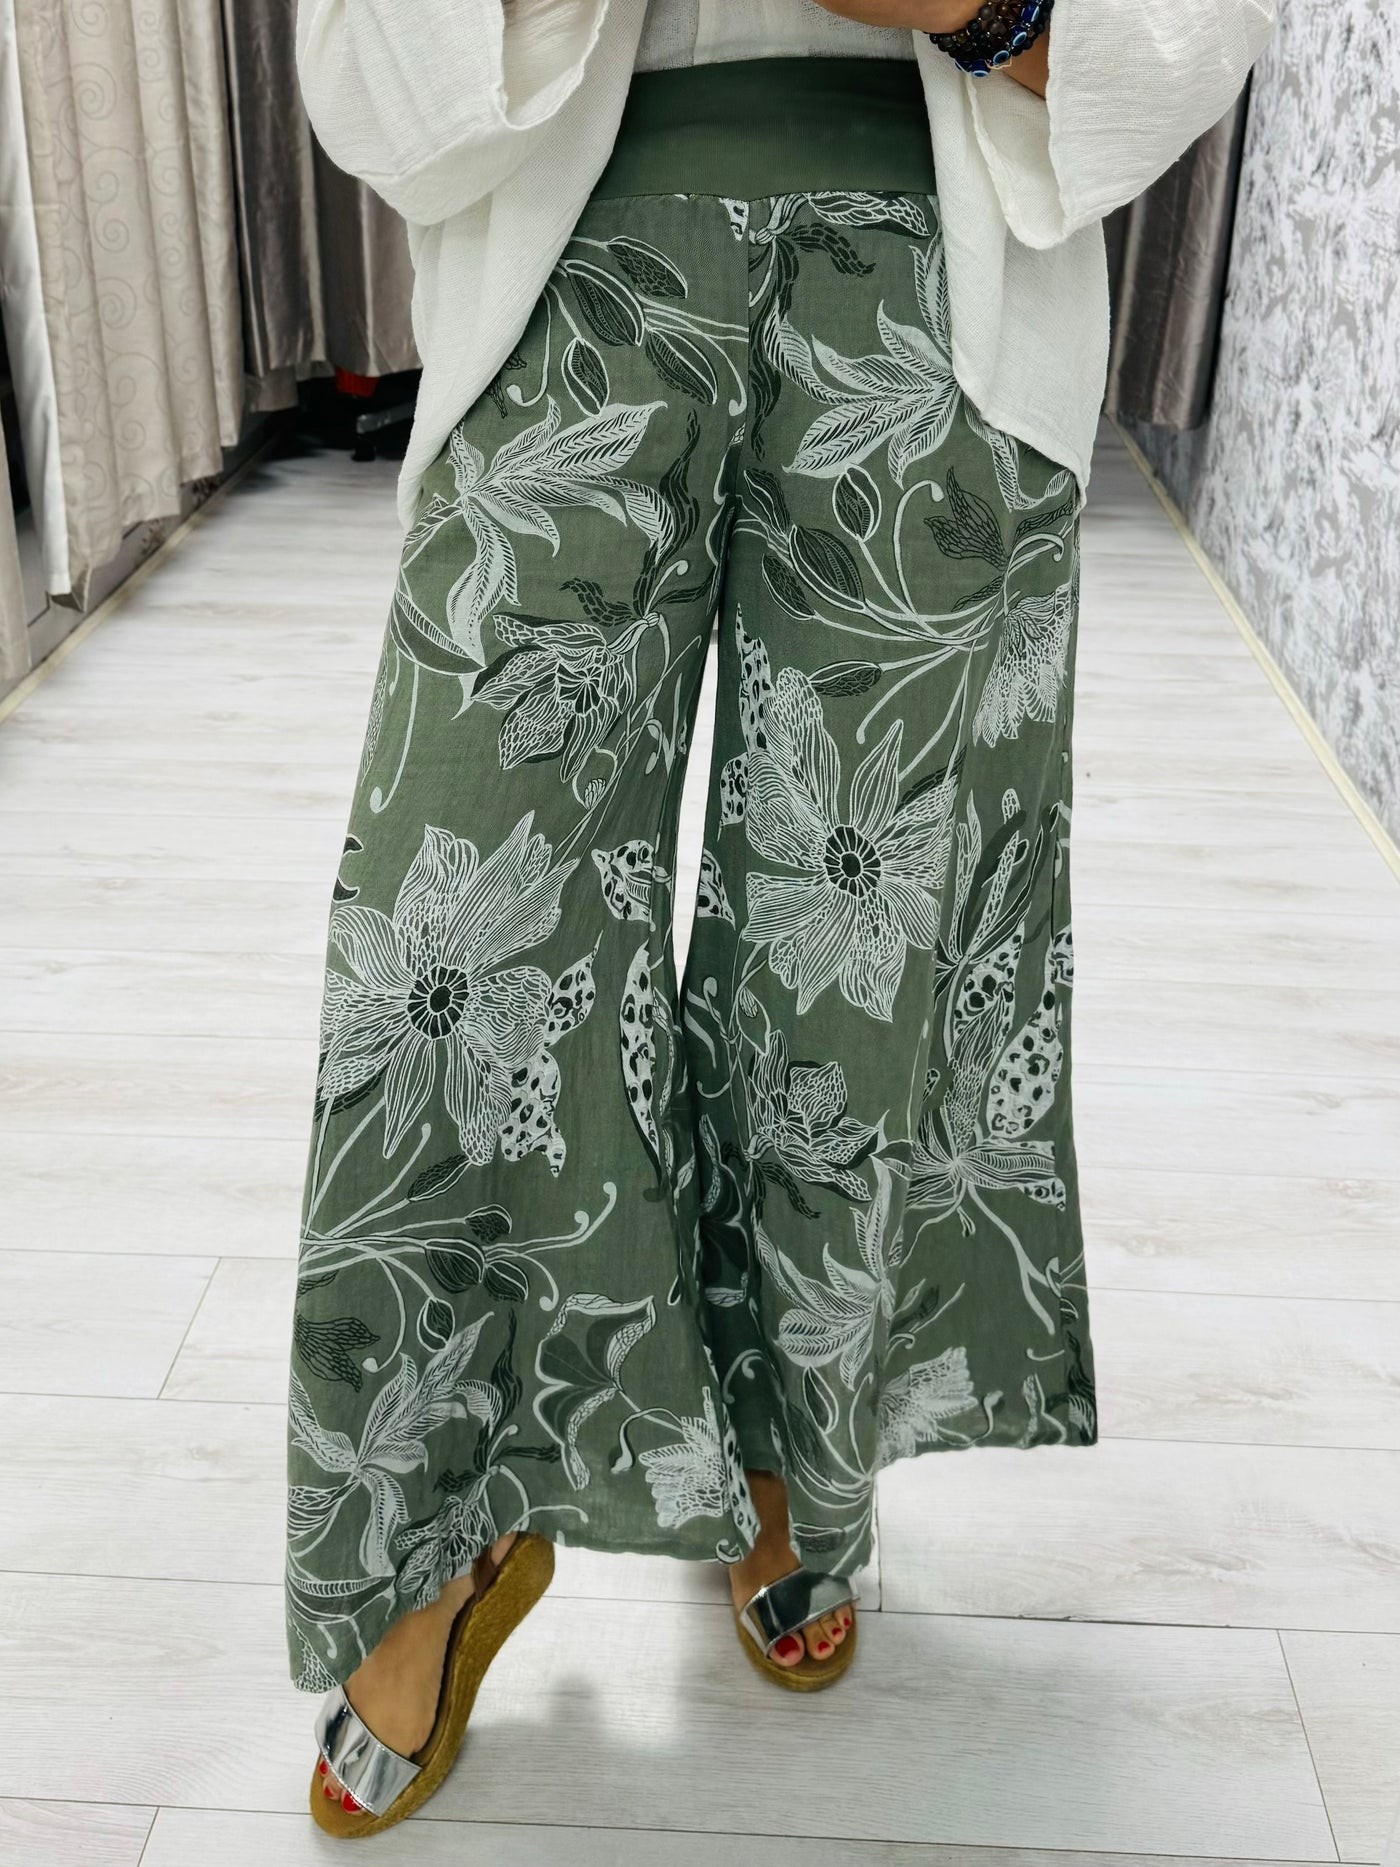 "IVY" Floral Print Trousers-Green & White